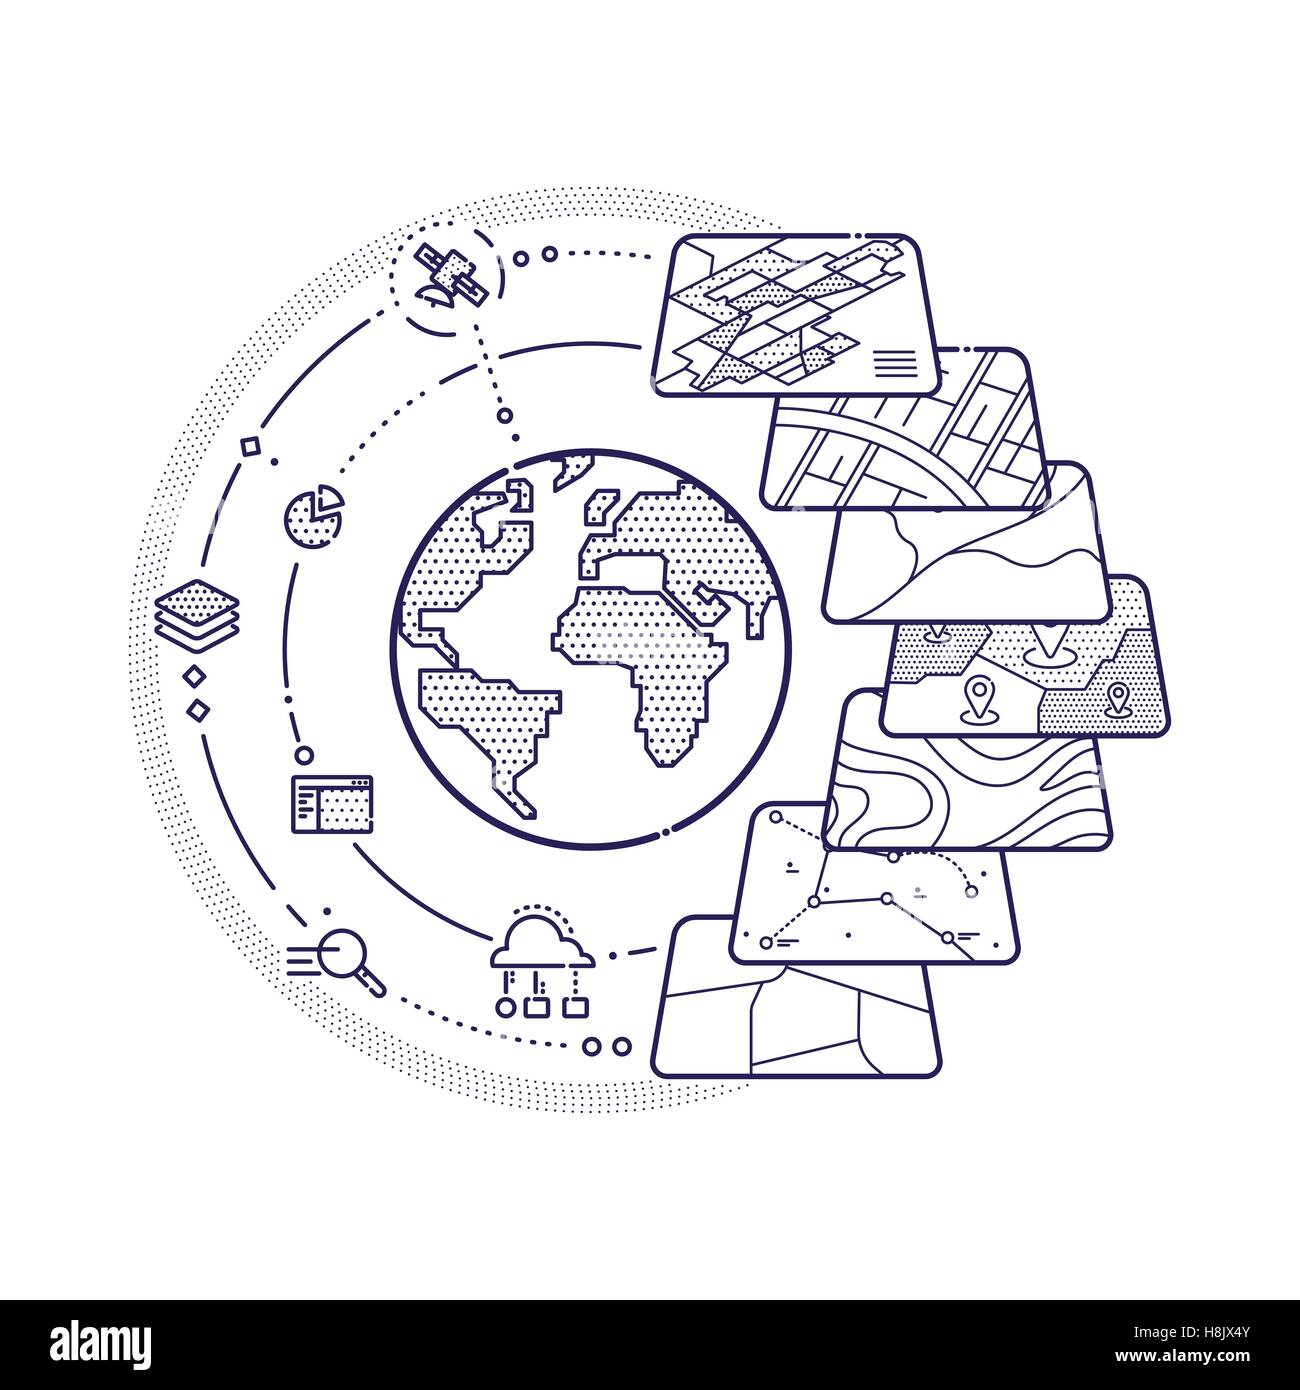 Vector Illustration of GIS Spatial Data Layers Concept for Business Analysis, Geographic Information System, Icons Design, Liner Stock Vector